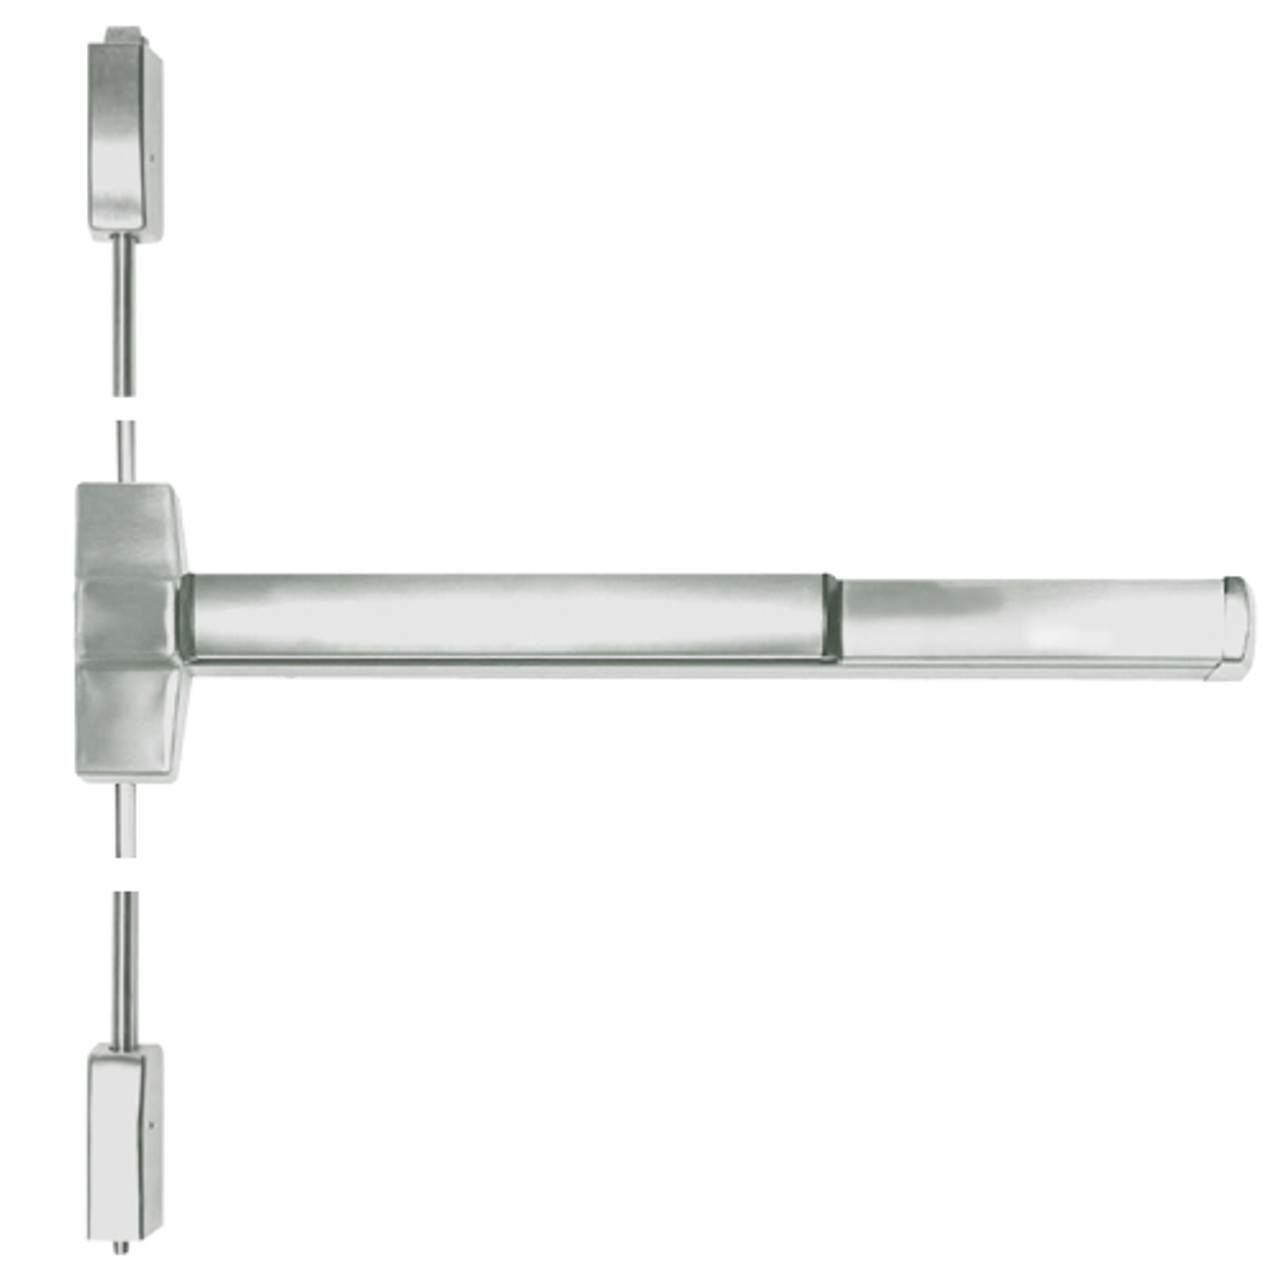 ED5470B-619-W048-MELR Corbin ED5400 Series Fire Rated Vertical Rod Exit Device with Motor Latch Retraction in Satin Nickel Finish